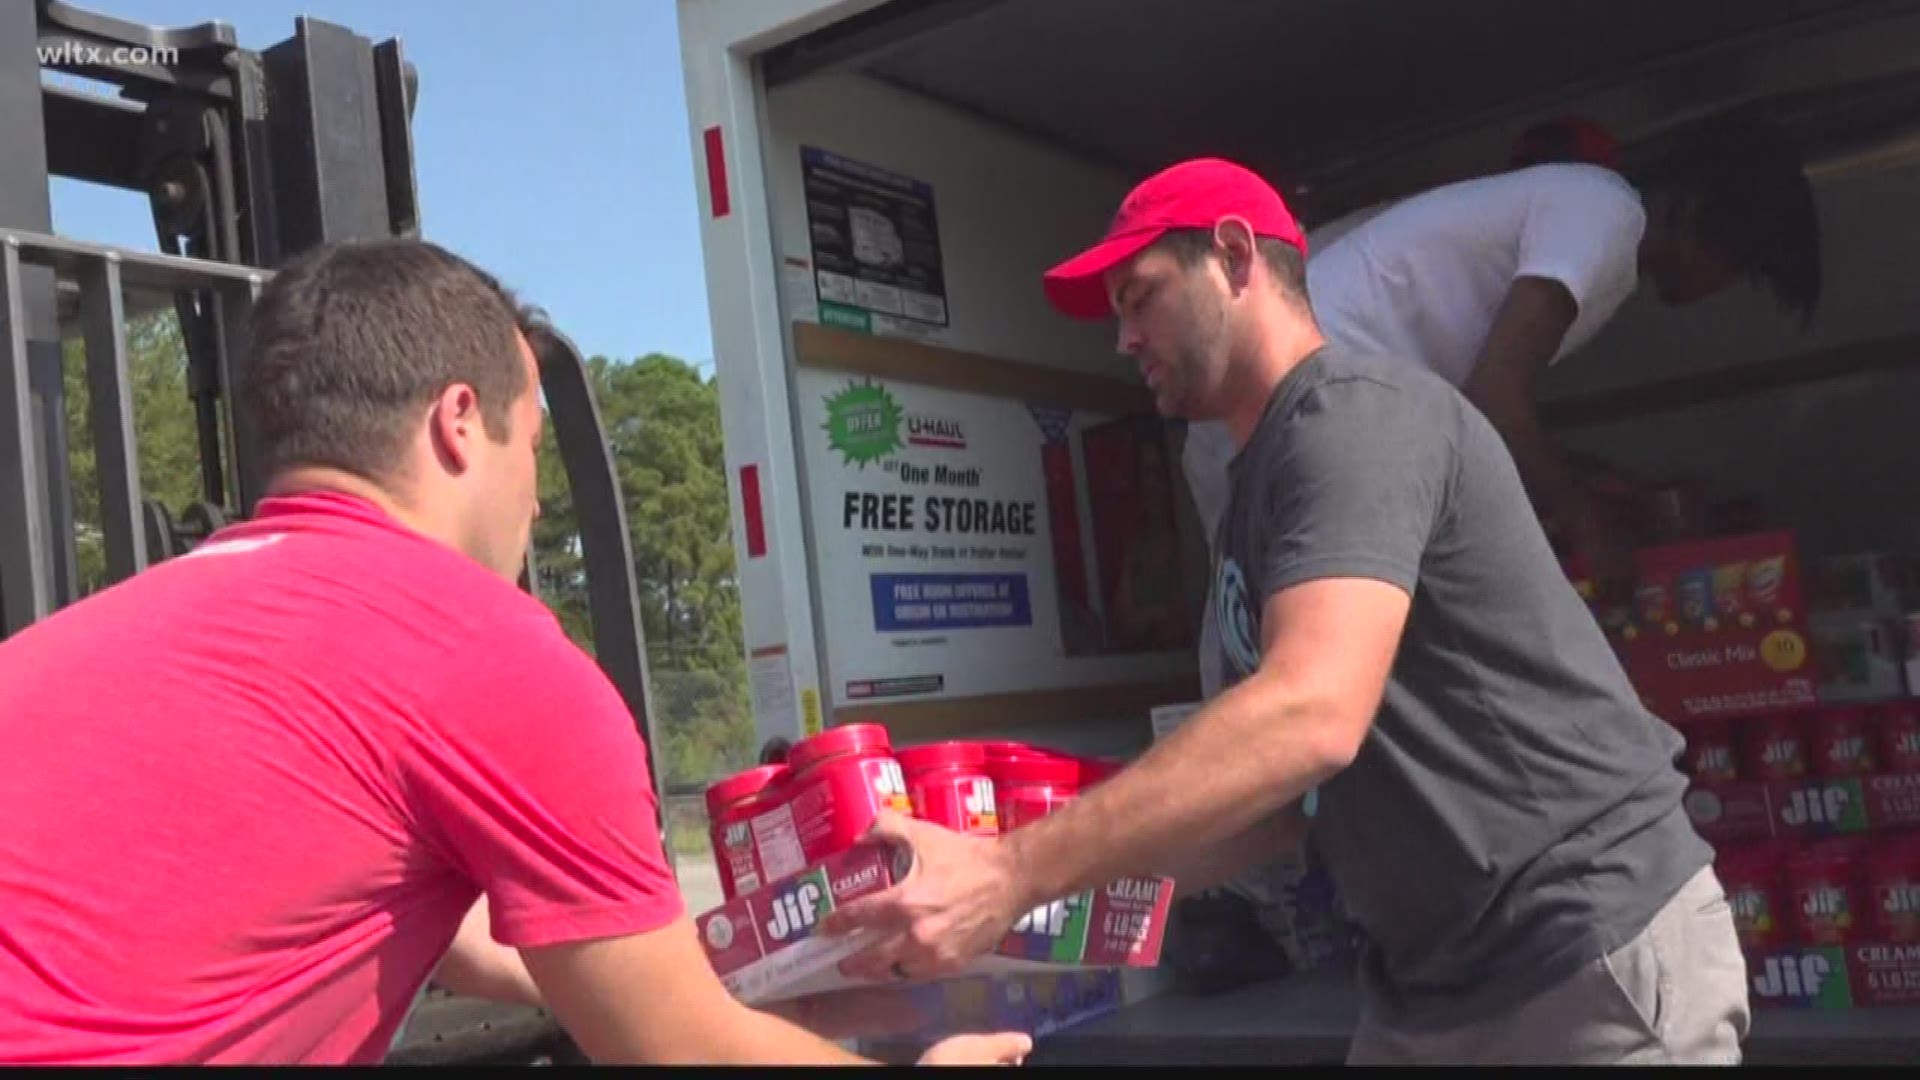 Nebraska business leaders flew into South Carolina today to personally donate disaster relief items to the Harvest Hope Food Bank.